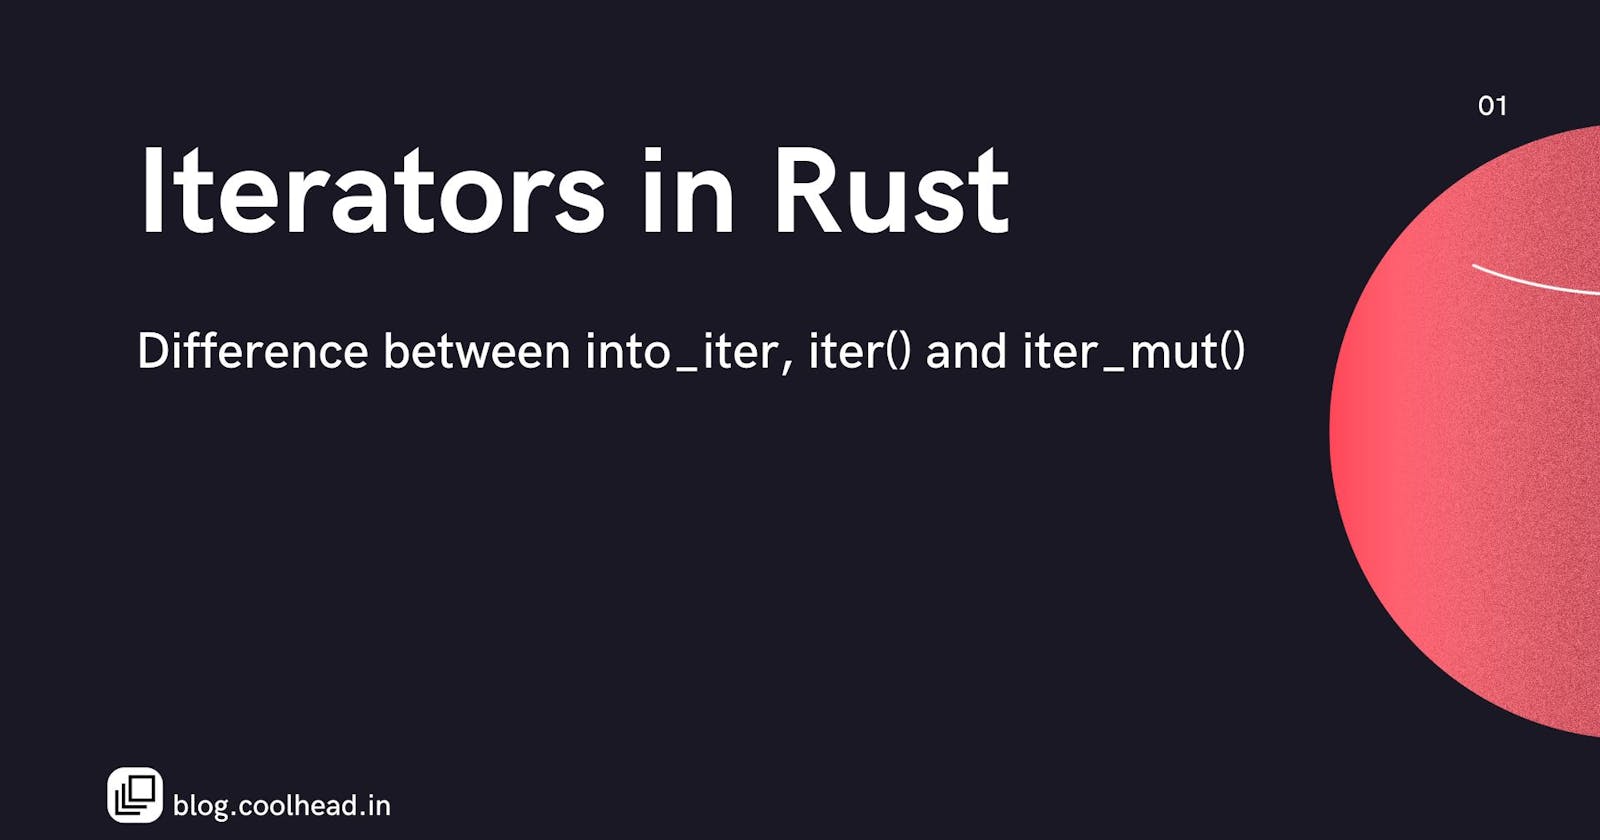 Difference Between into_iter, iter() and iter_mut() in rust